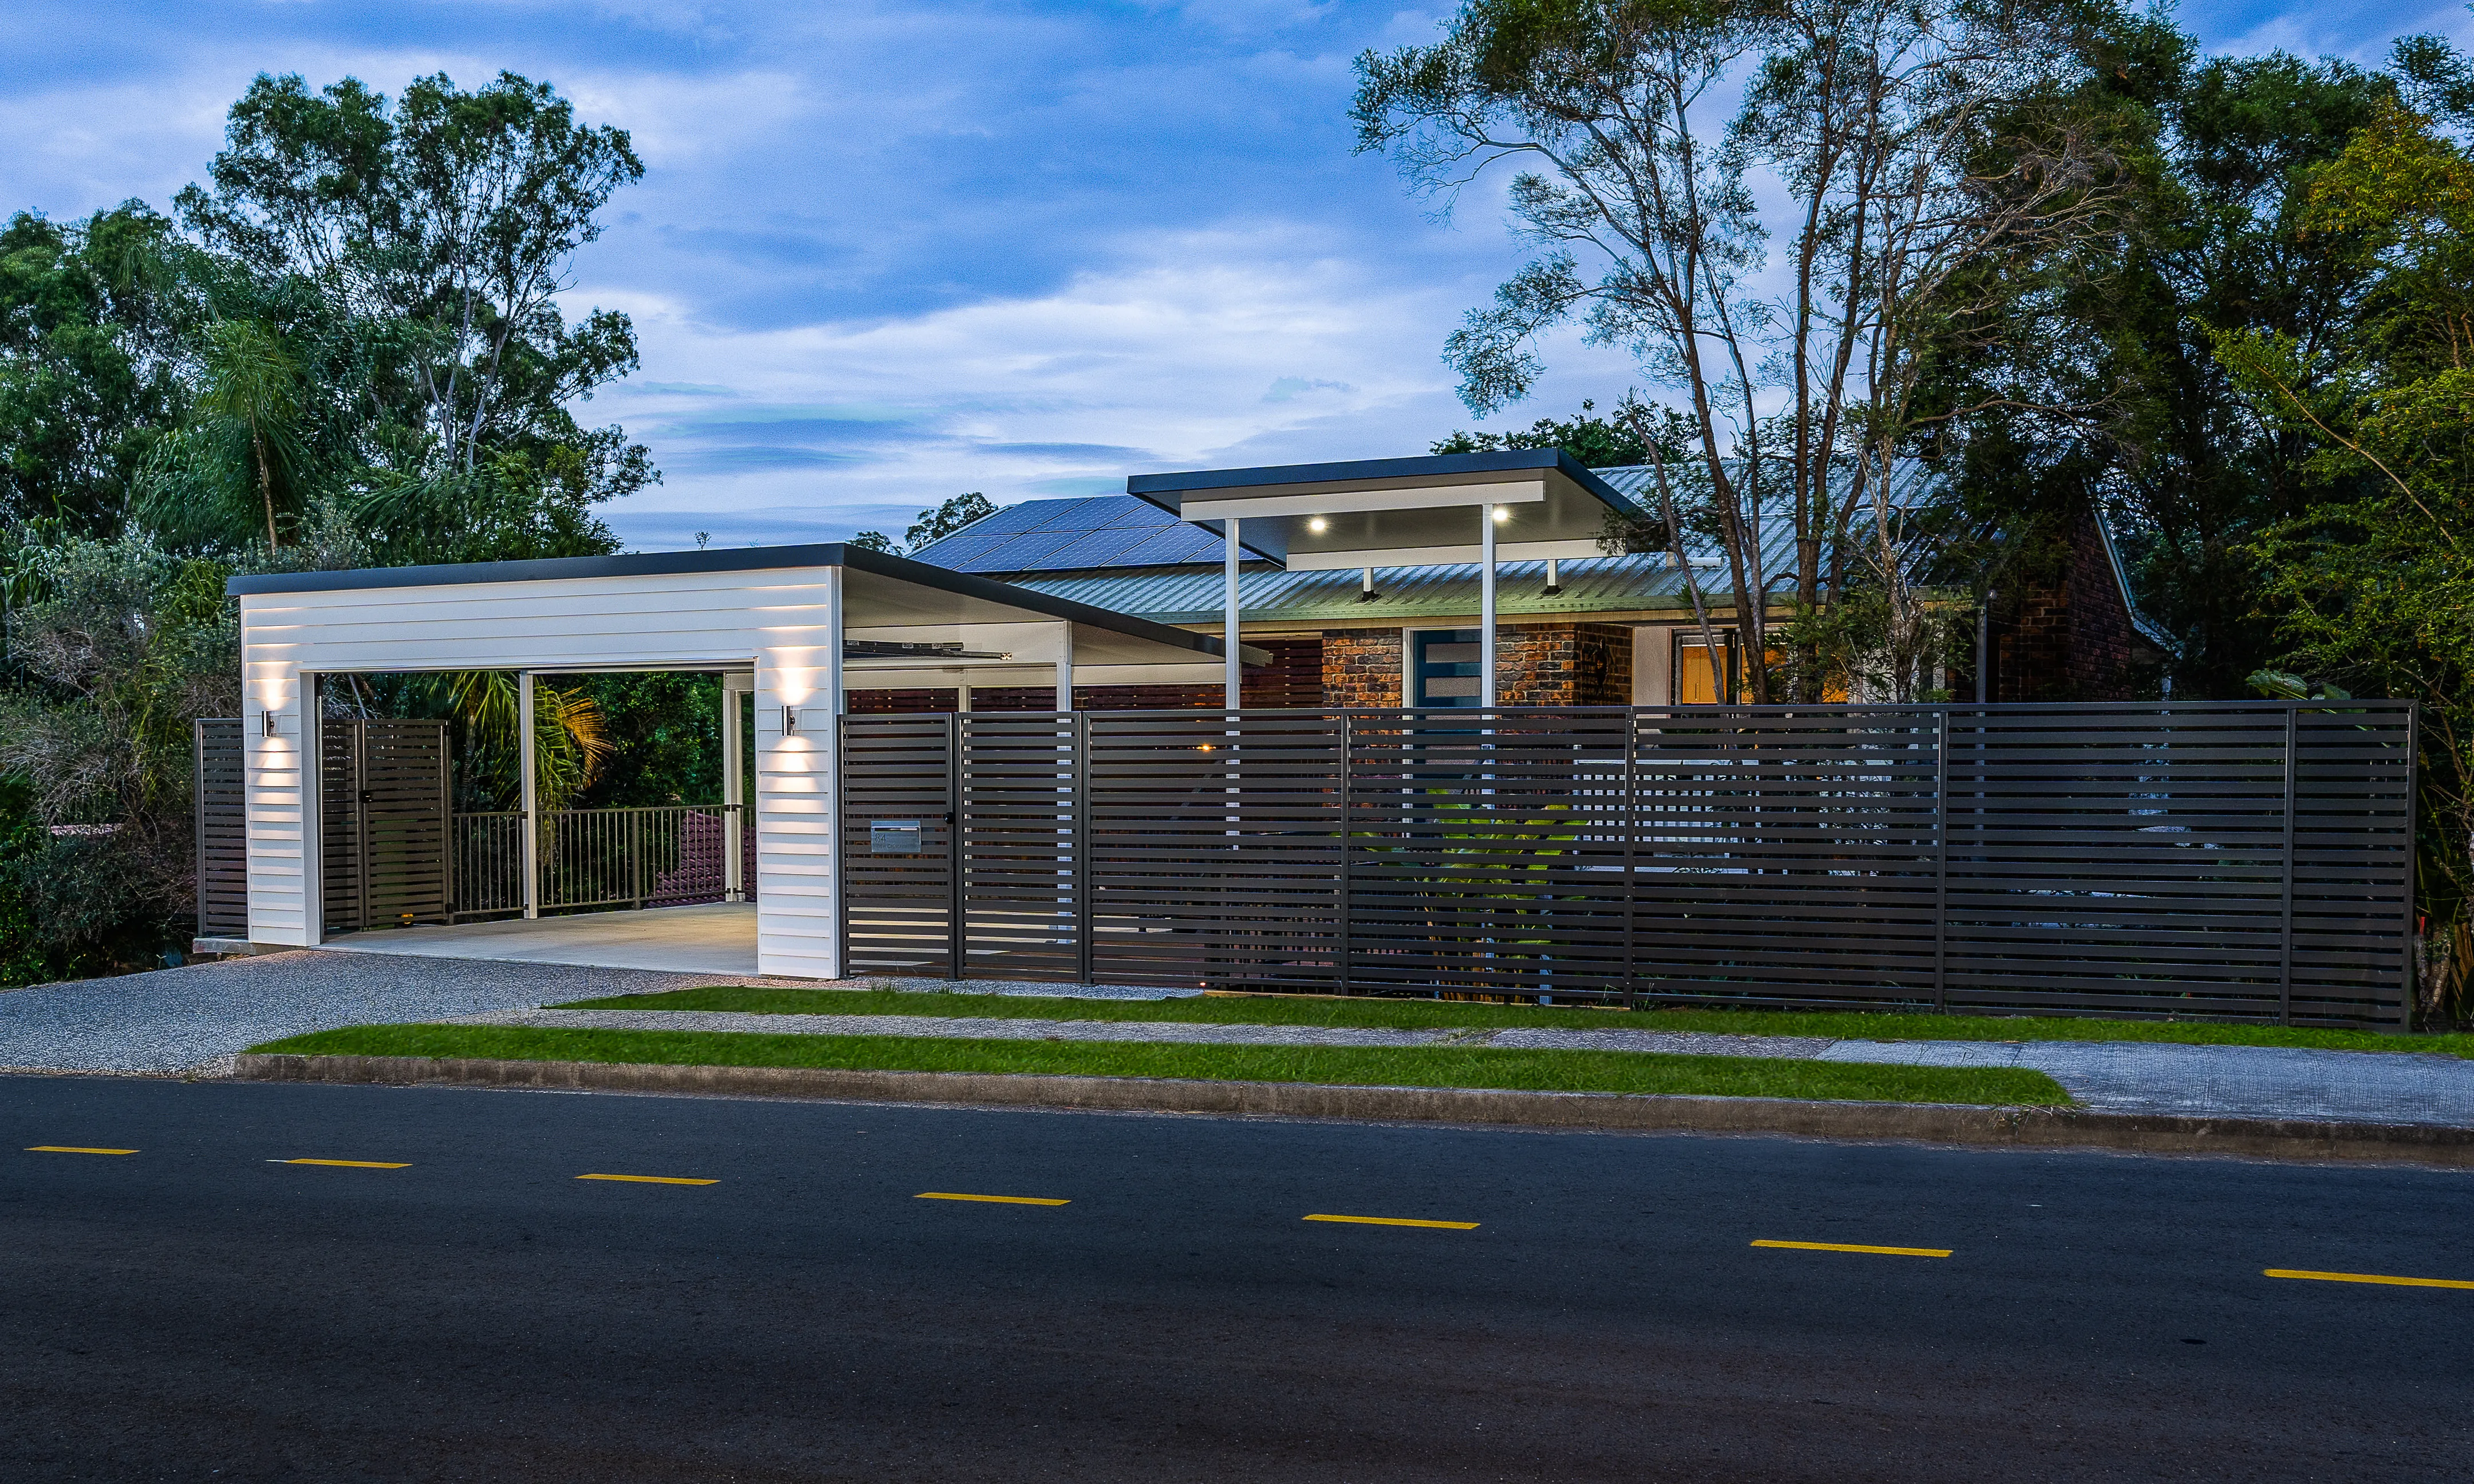 Carport and boundary fence and exposed concrete driveway